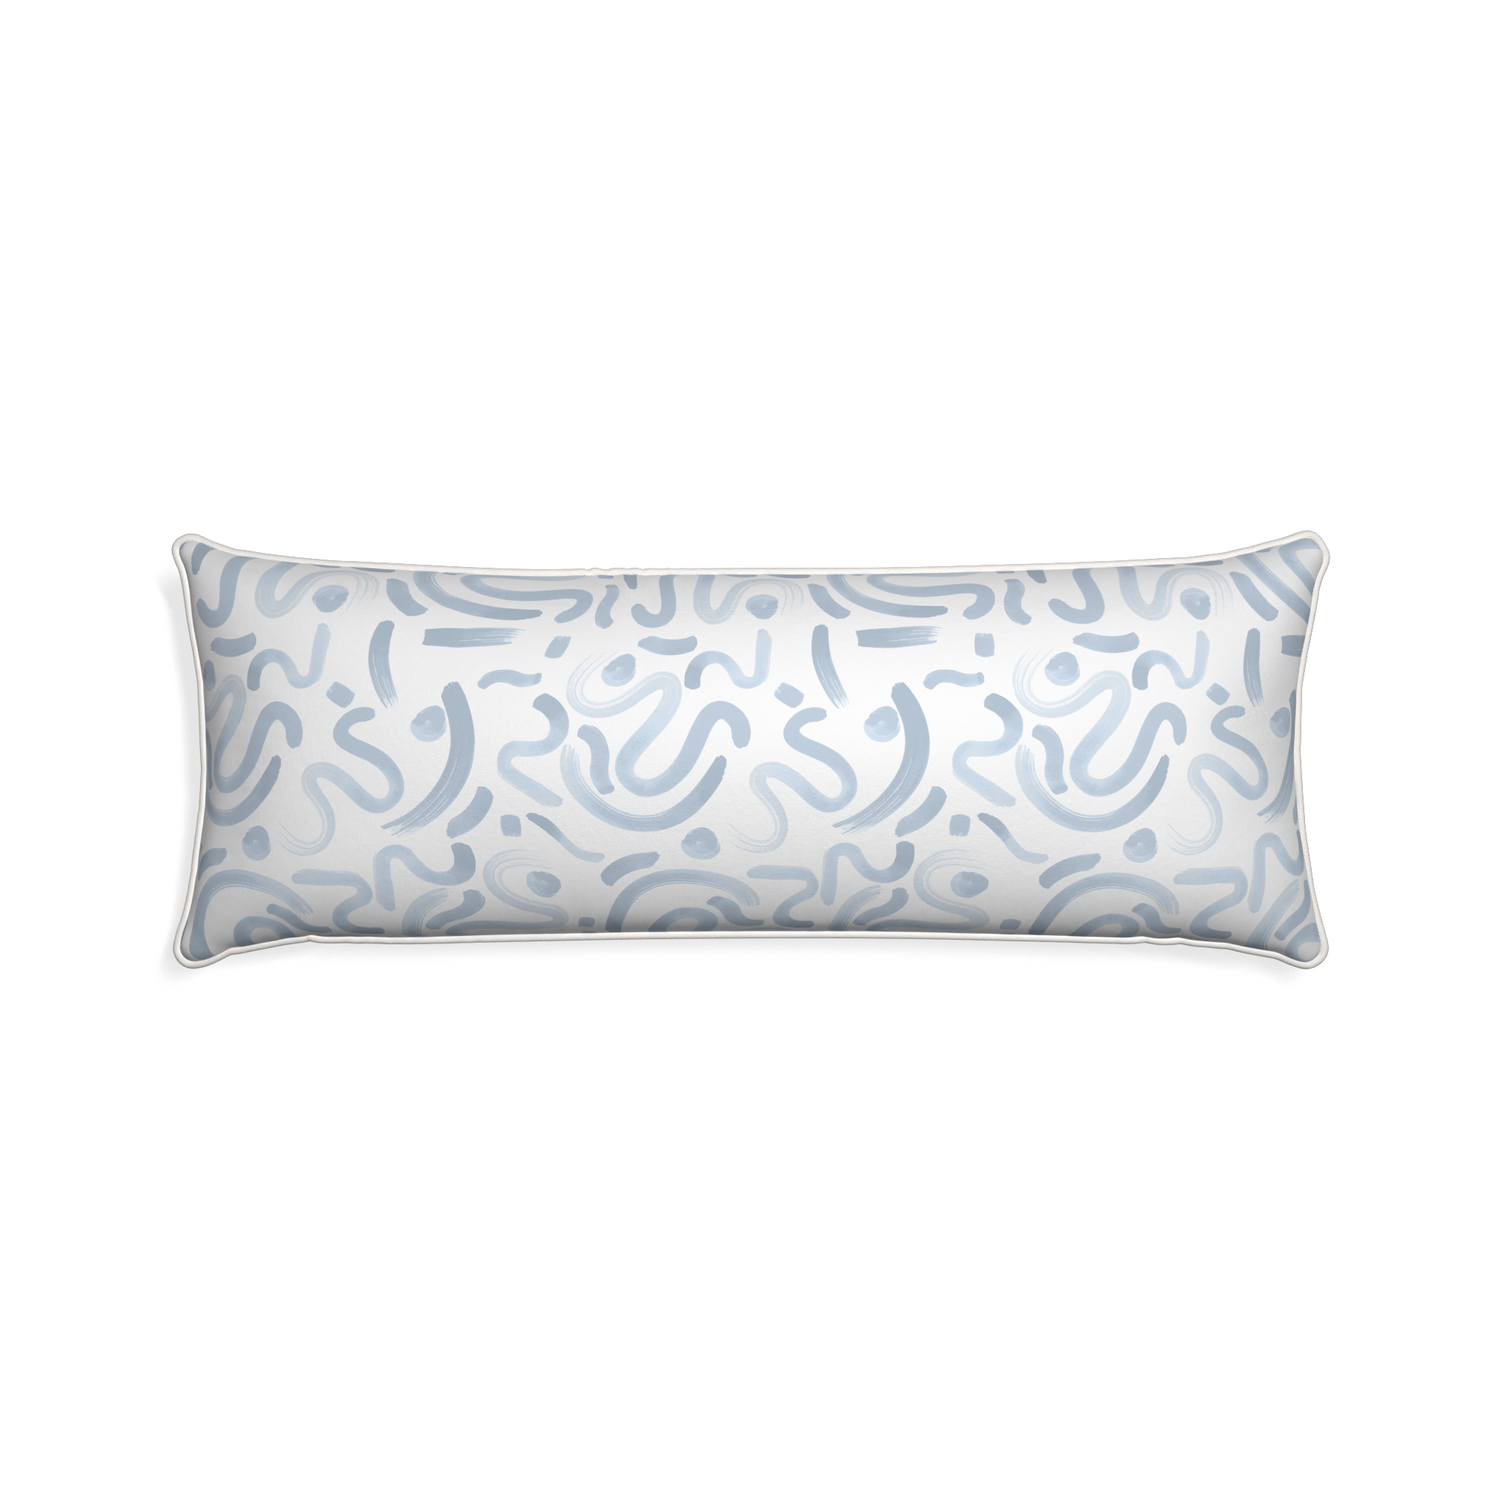 Xl-lumbar hockney sky custom pillow with snow piping on white background